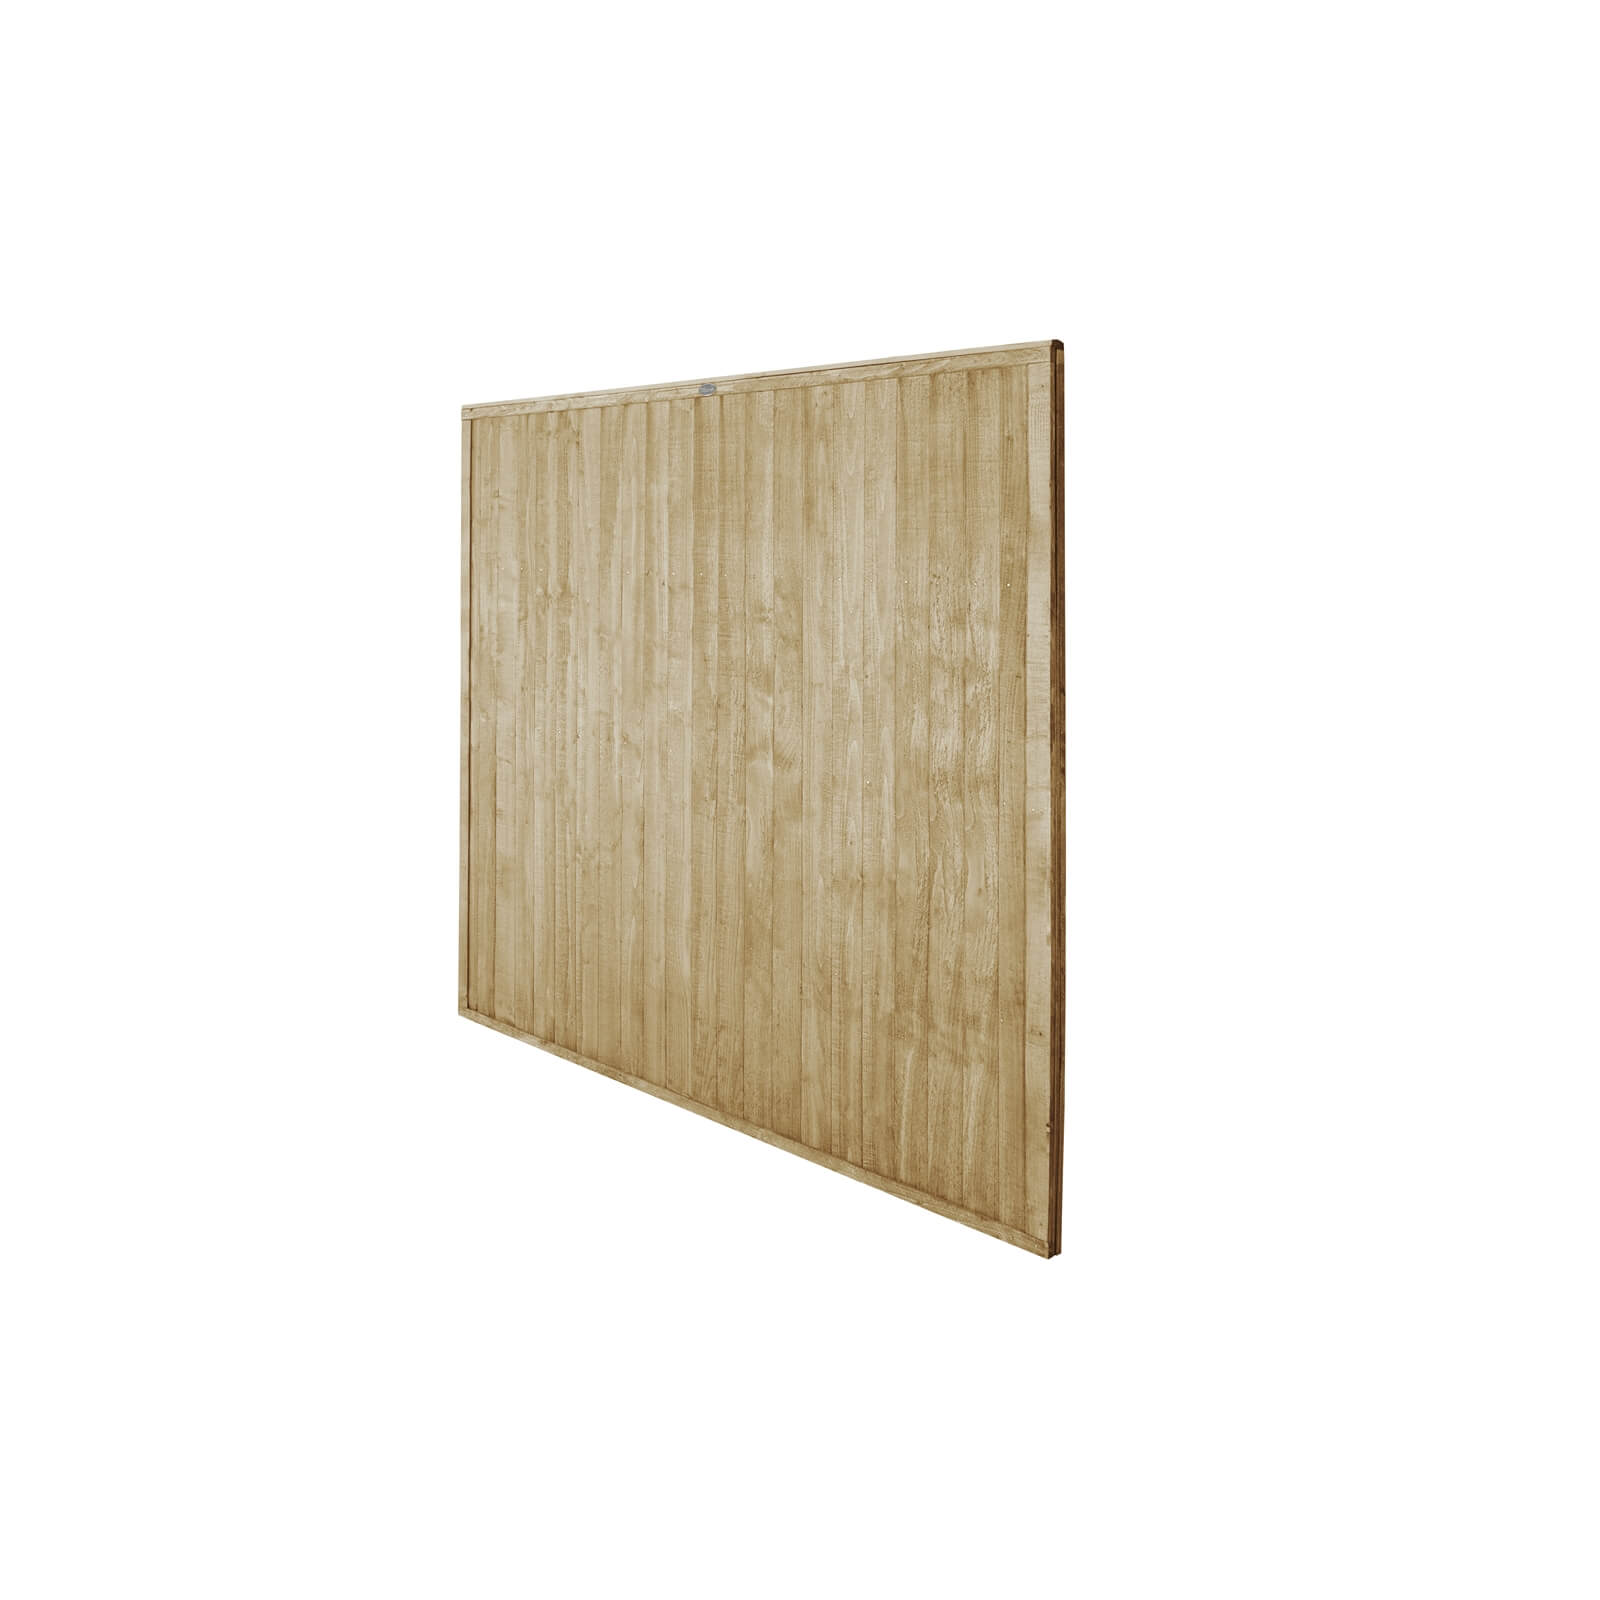 6ft x 6ft (1.83m x 1.83m) Pressure Treated Closeboard Fence Panel - Pack of 4